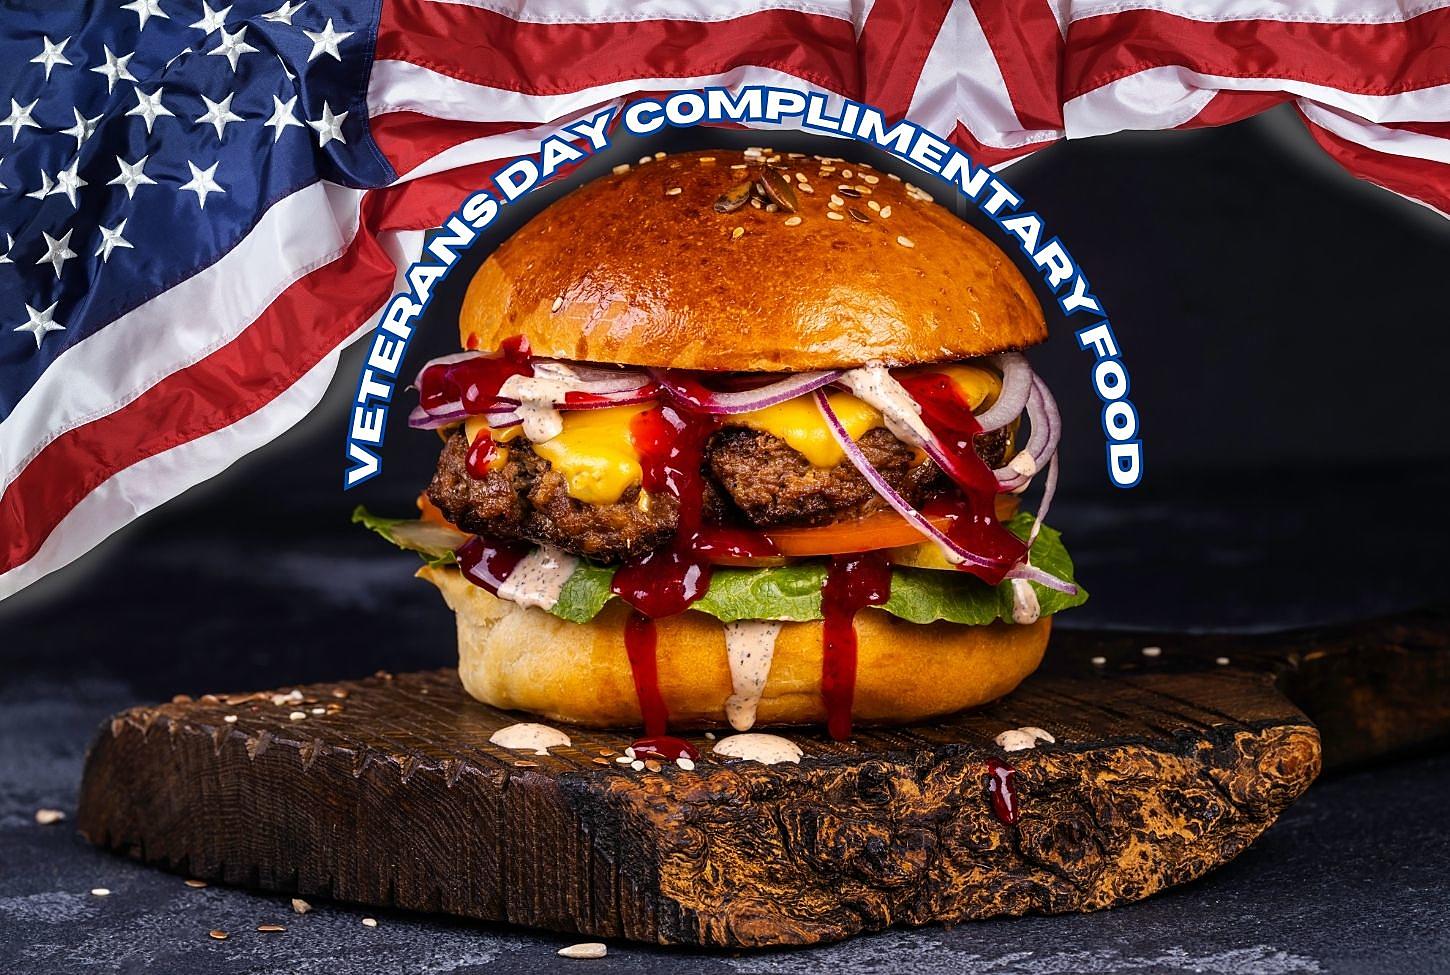 Iowa's 2023 Veterans Day Free Meals Restaurant Deals and Discount